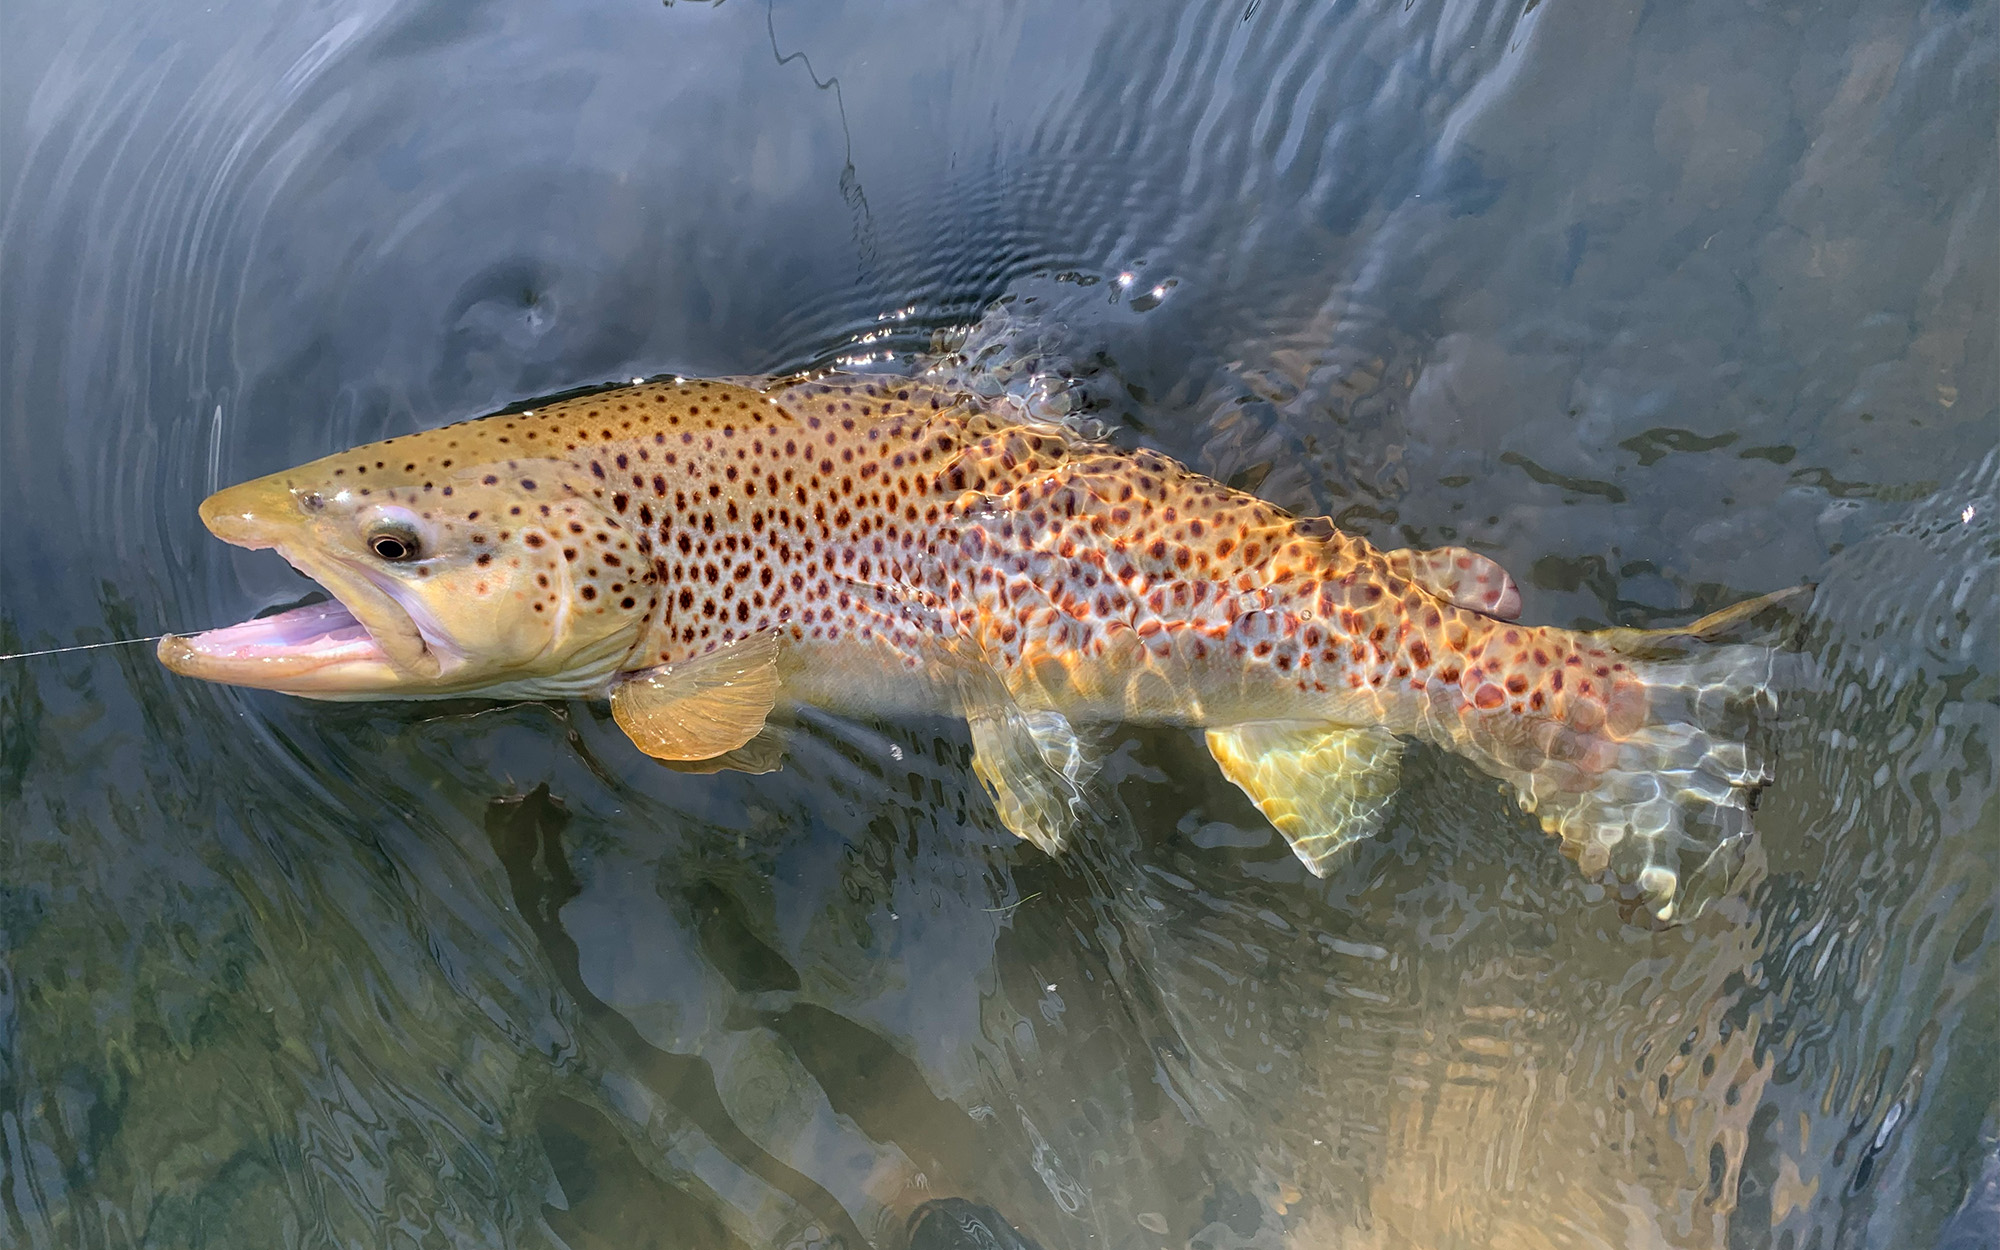 A brown trout caught on the fly.